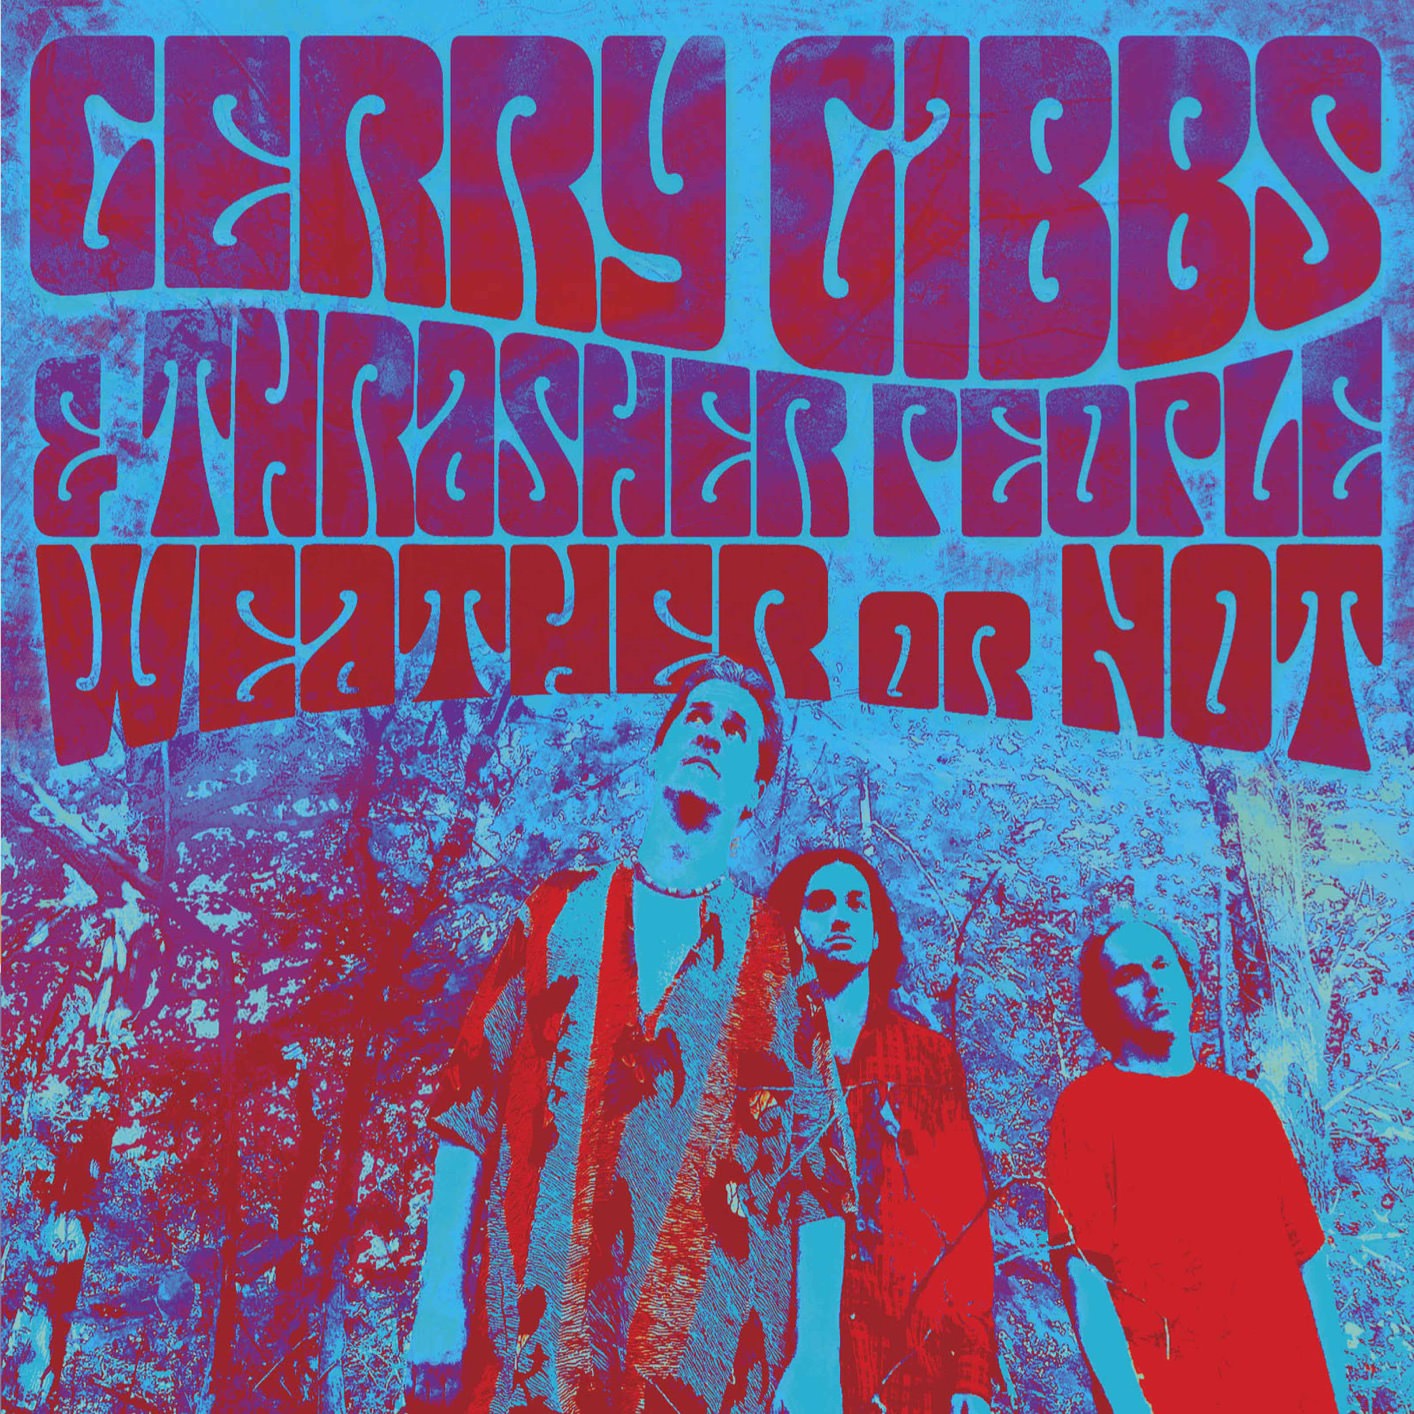 Gerry Gibbs & Thrasher People - Weather Or Not (2017) [HDTracks FLAC 24bit/96kHz]